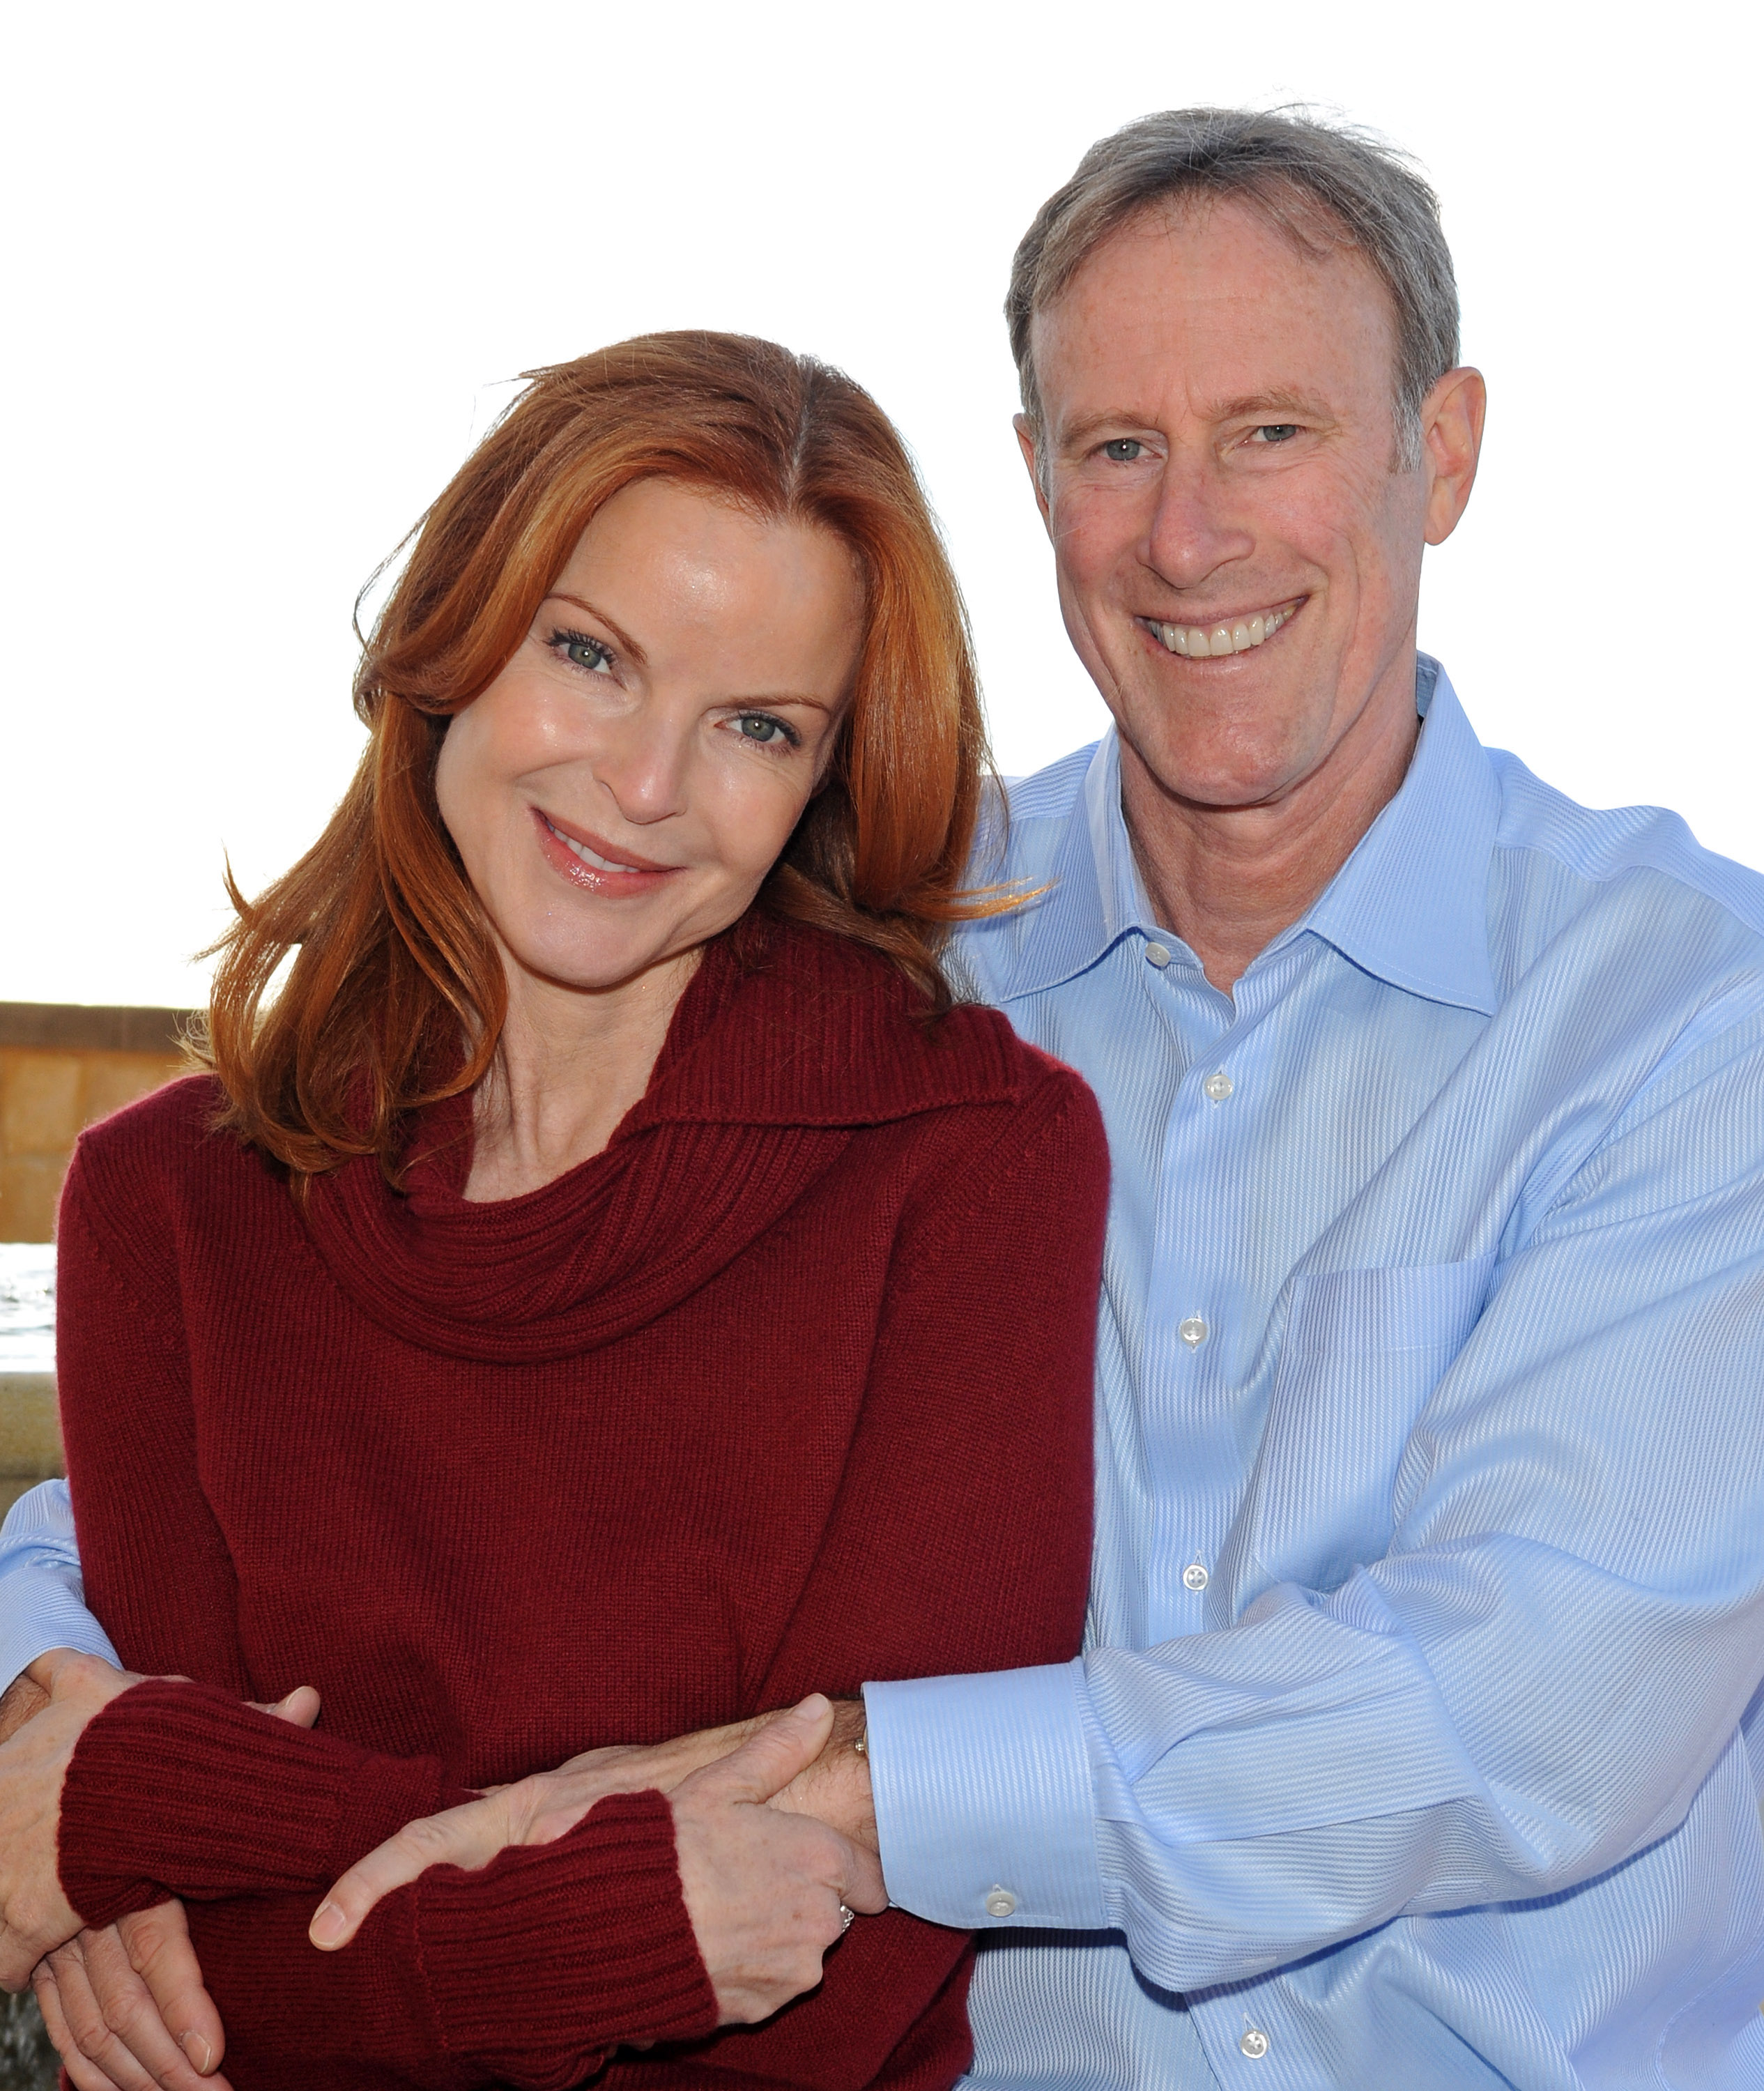 Marcia Cross and Tom Mahoney at Pelican Hill Resort on December 31, 2010 in Newport Beach, California. | Source: Getty Images